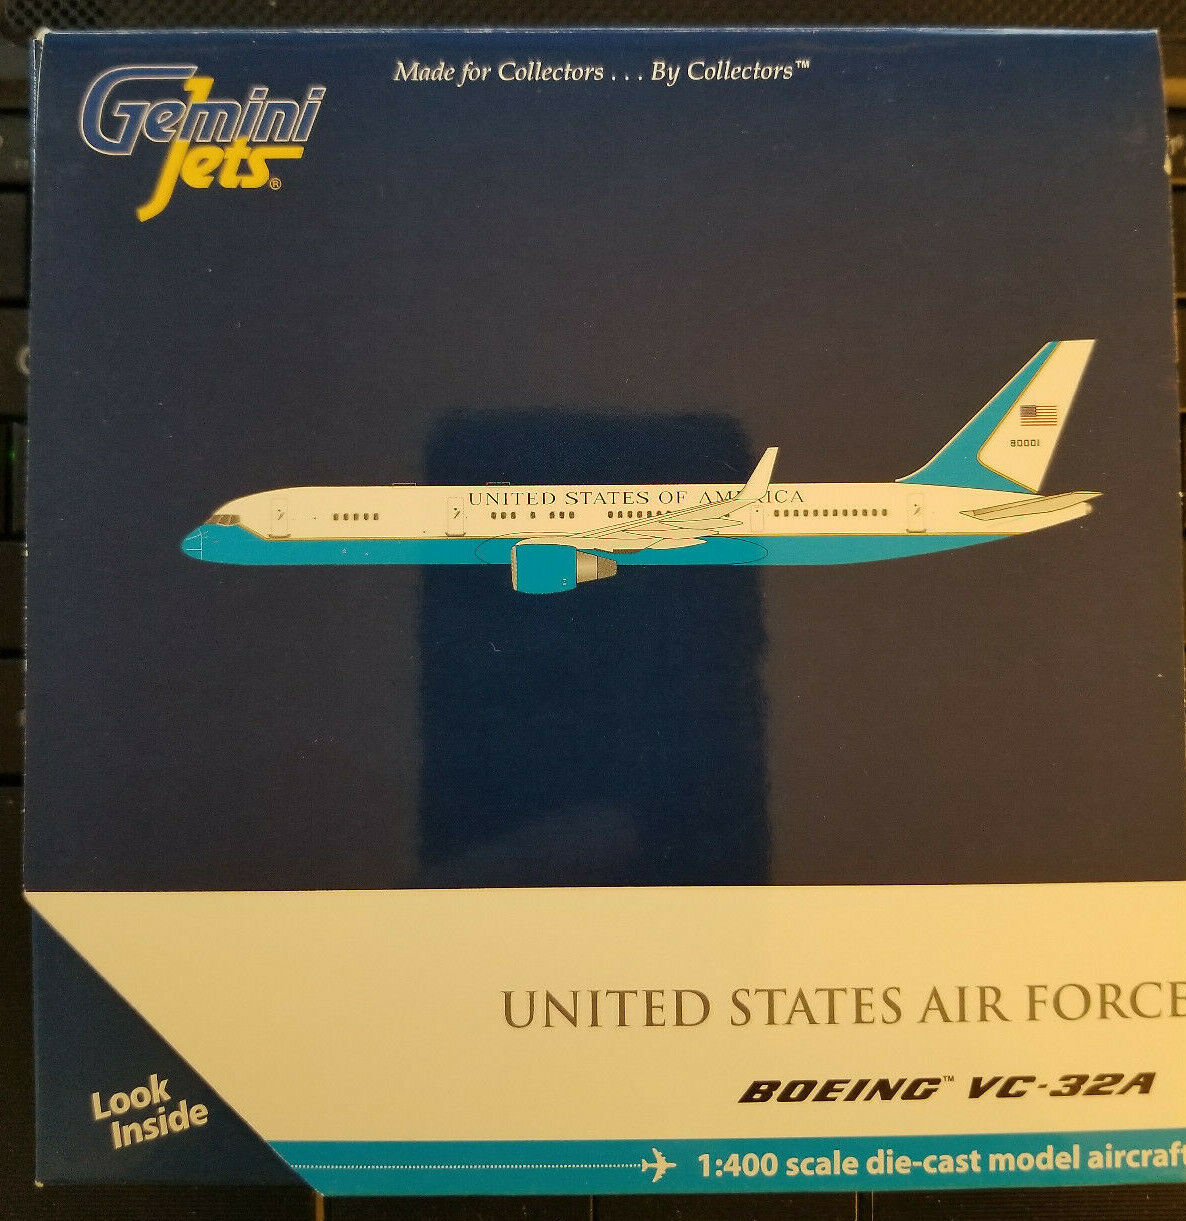 BRAND NEW 1:400 Gemini Jets USAF AIR FORCE TWO VC-32A 757-200W GJAFO954 80001